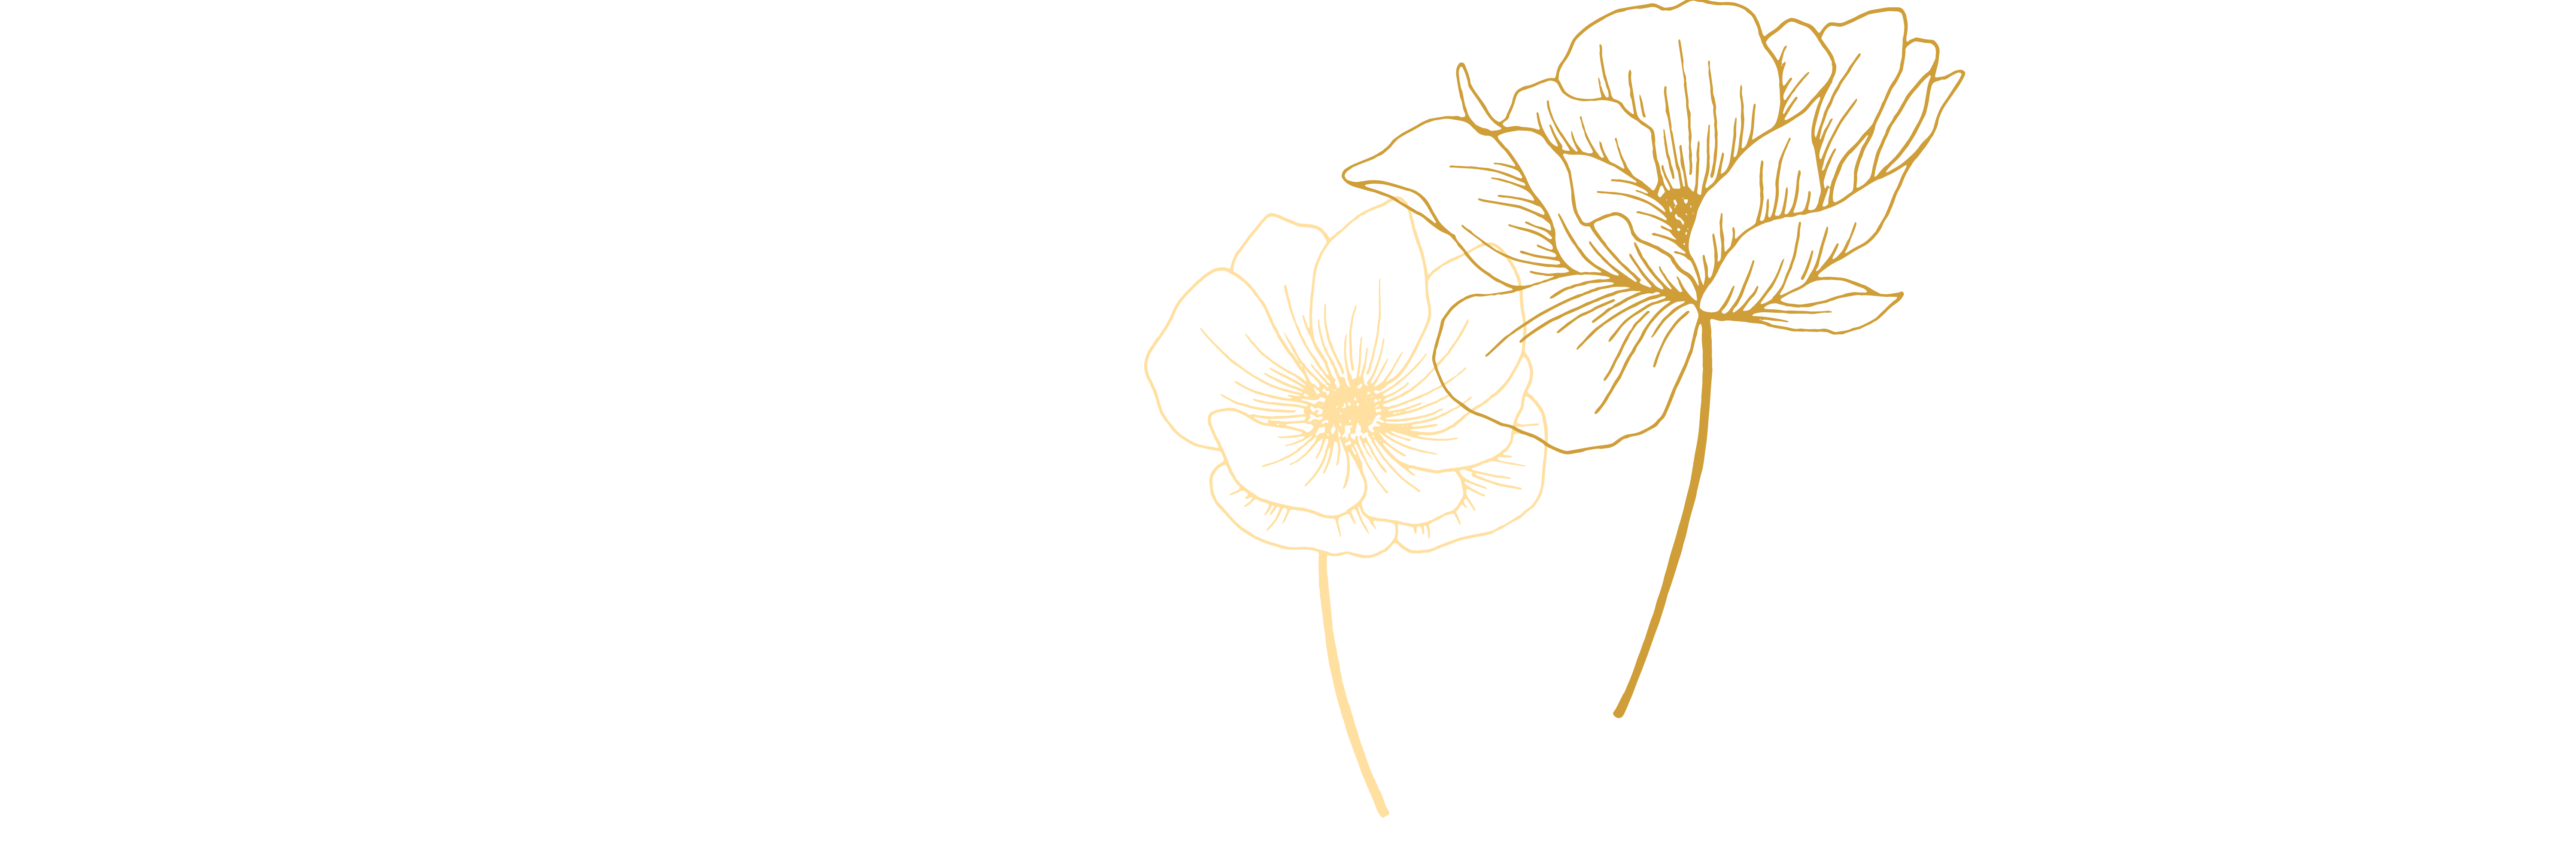 Madison's Library